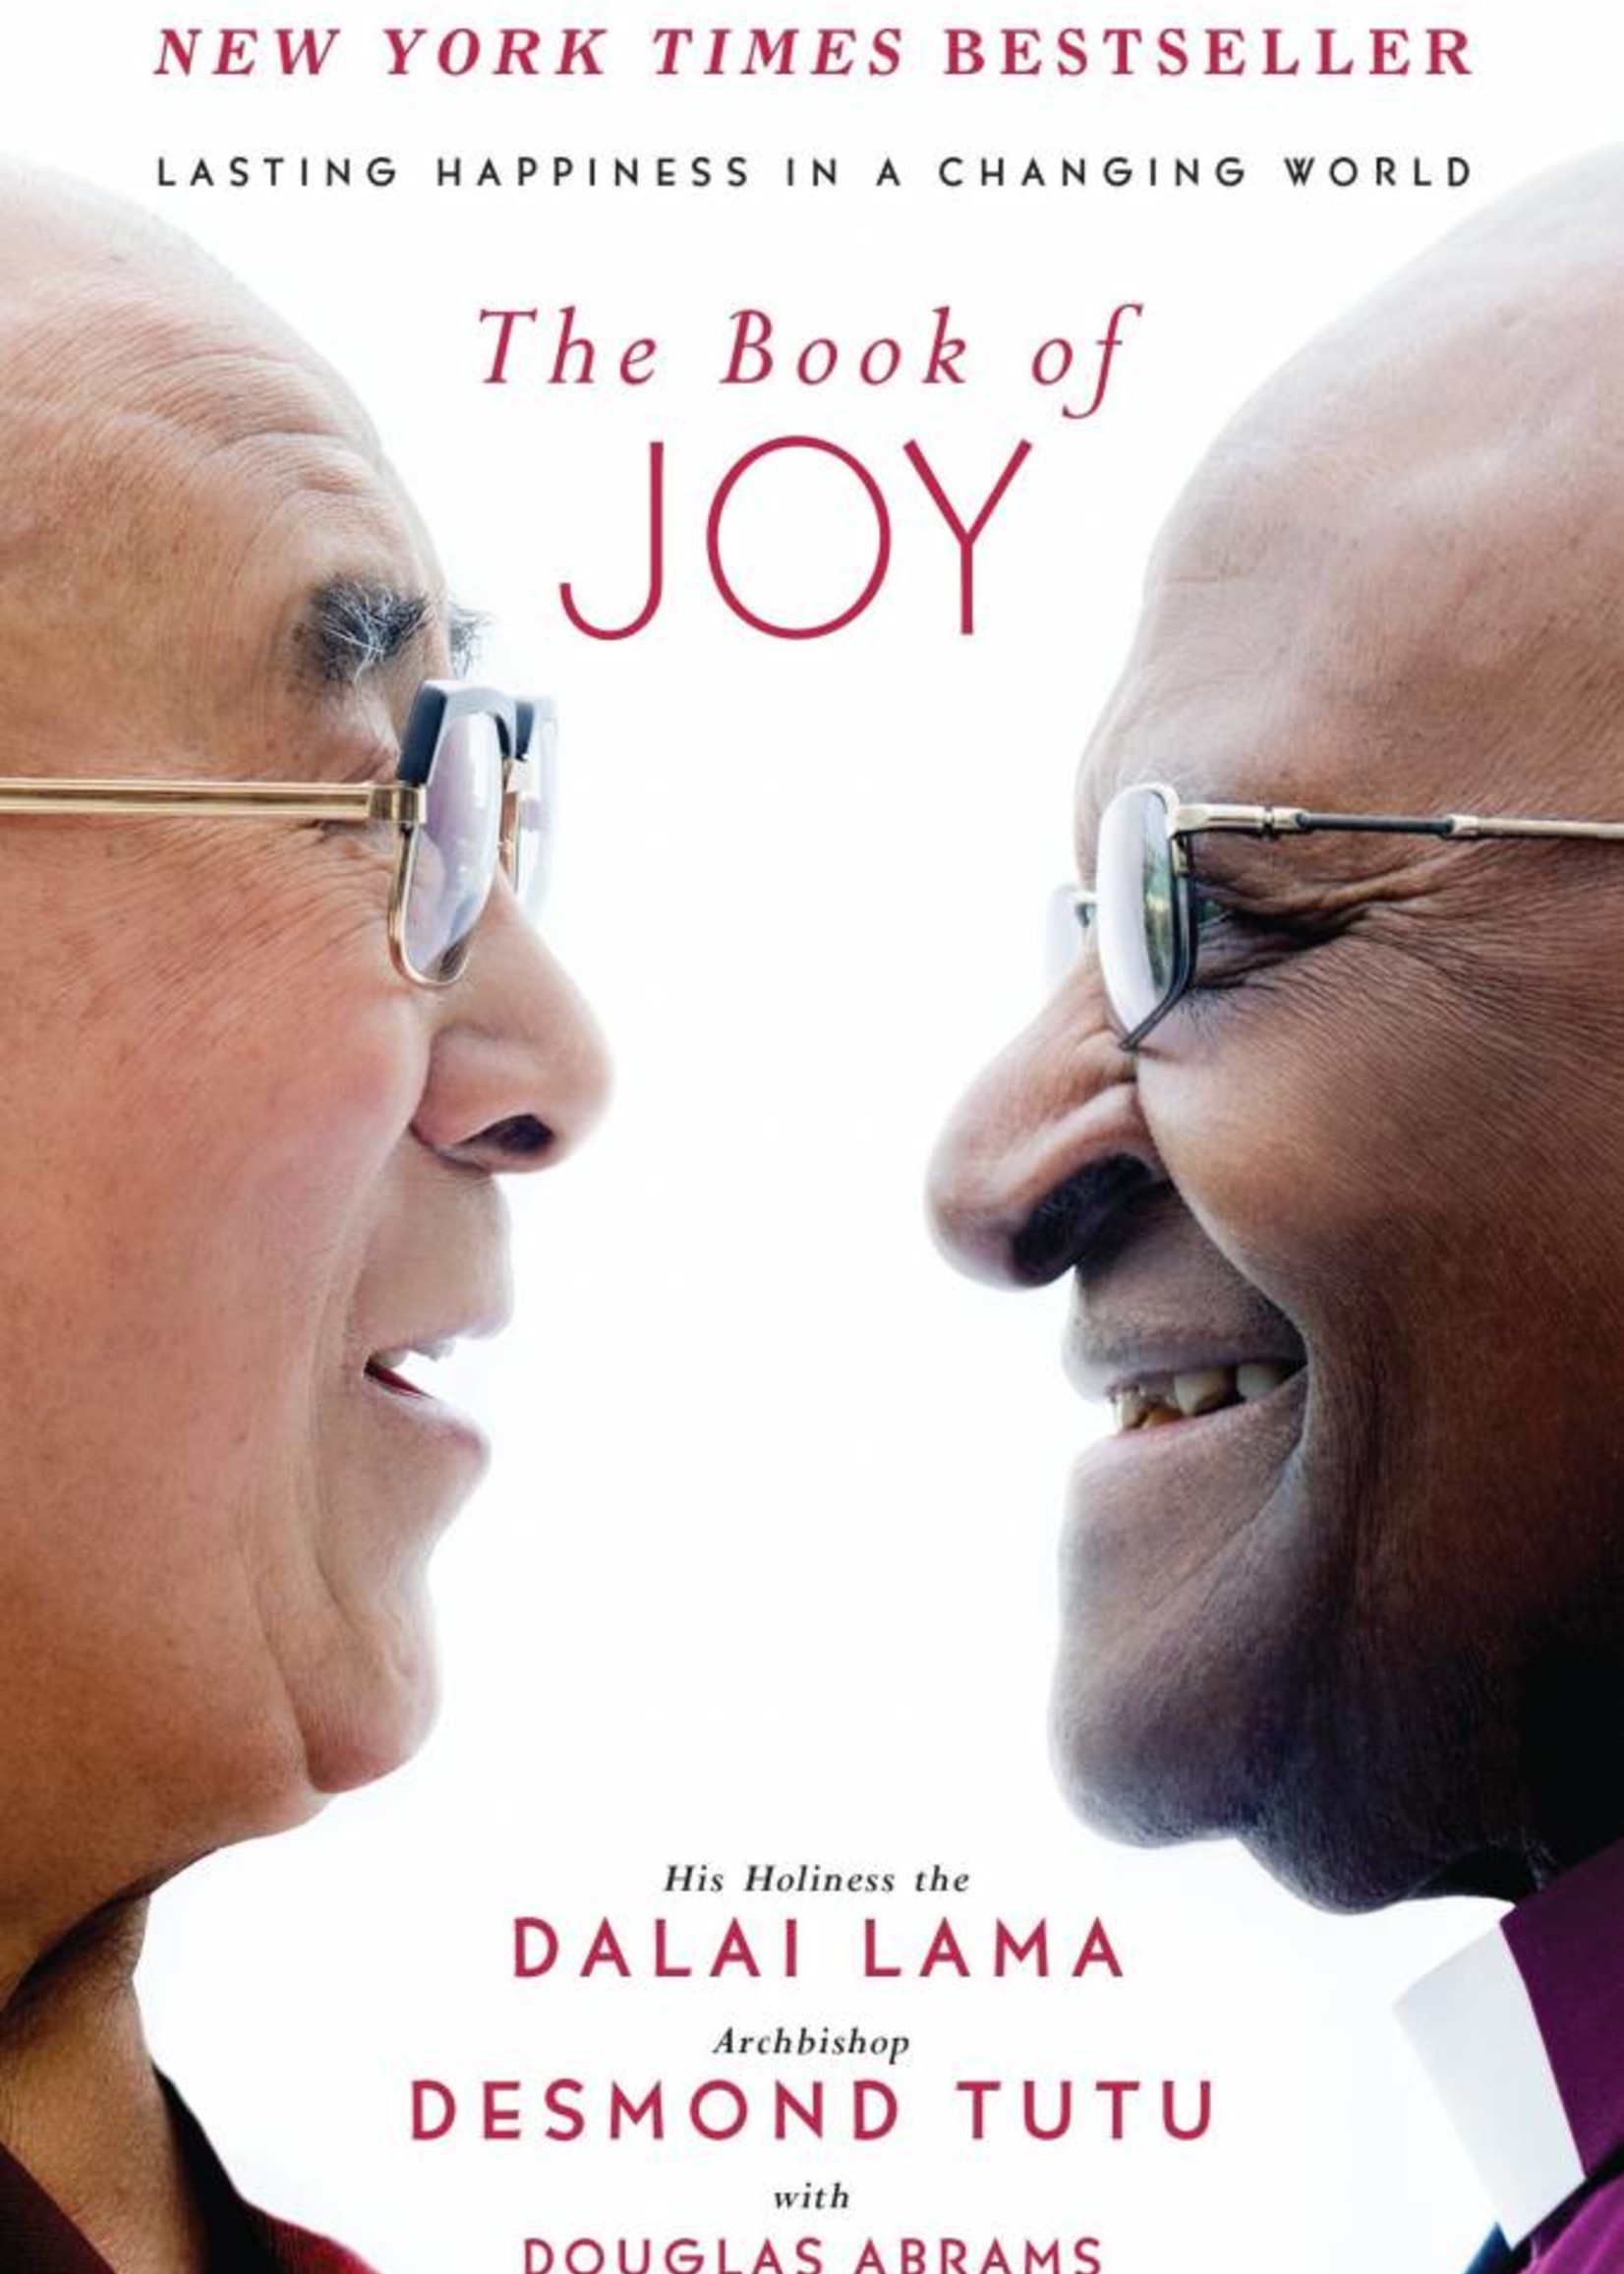 Book of Joy | Lasting Happiness in a Changing World